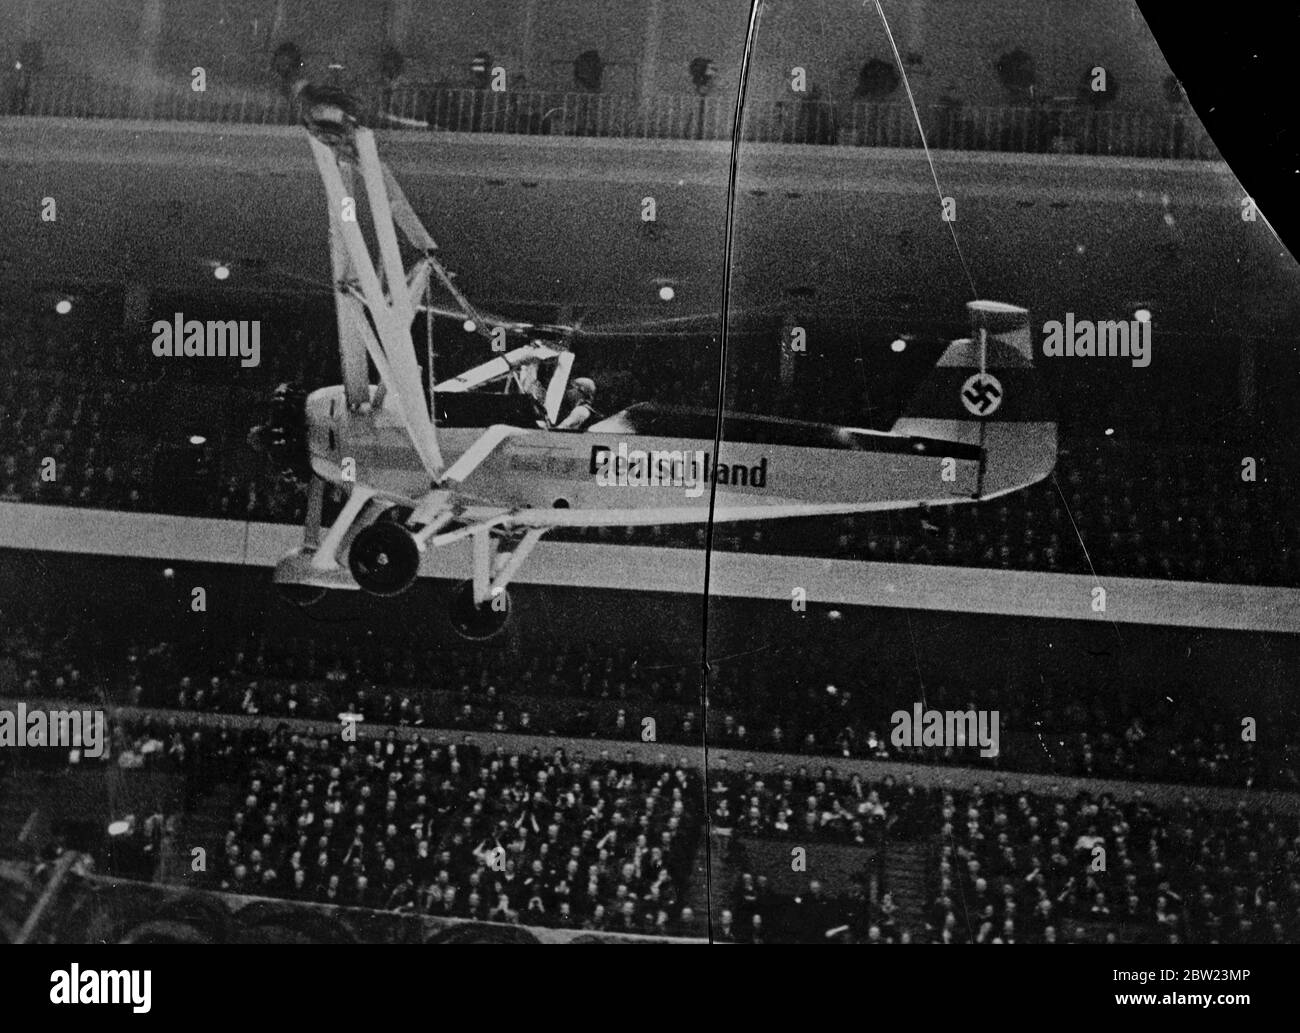 Woman makes flying history makes world's first indoor flight. Hanna Reitsch, the German air woman, made aeronautical history when she accomplish the first indoor flight watched by 10,000 people in the Deutschland Halle, Berlin. Using a Focke Wulf autogyro, Fraulein Reitsch took off, flew up and down the hall, manoeuvred skillfully, and landed. 22 February 1938 Stock Photo